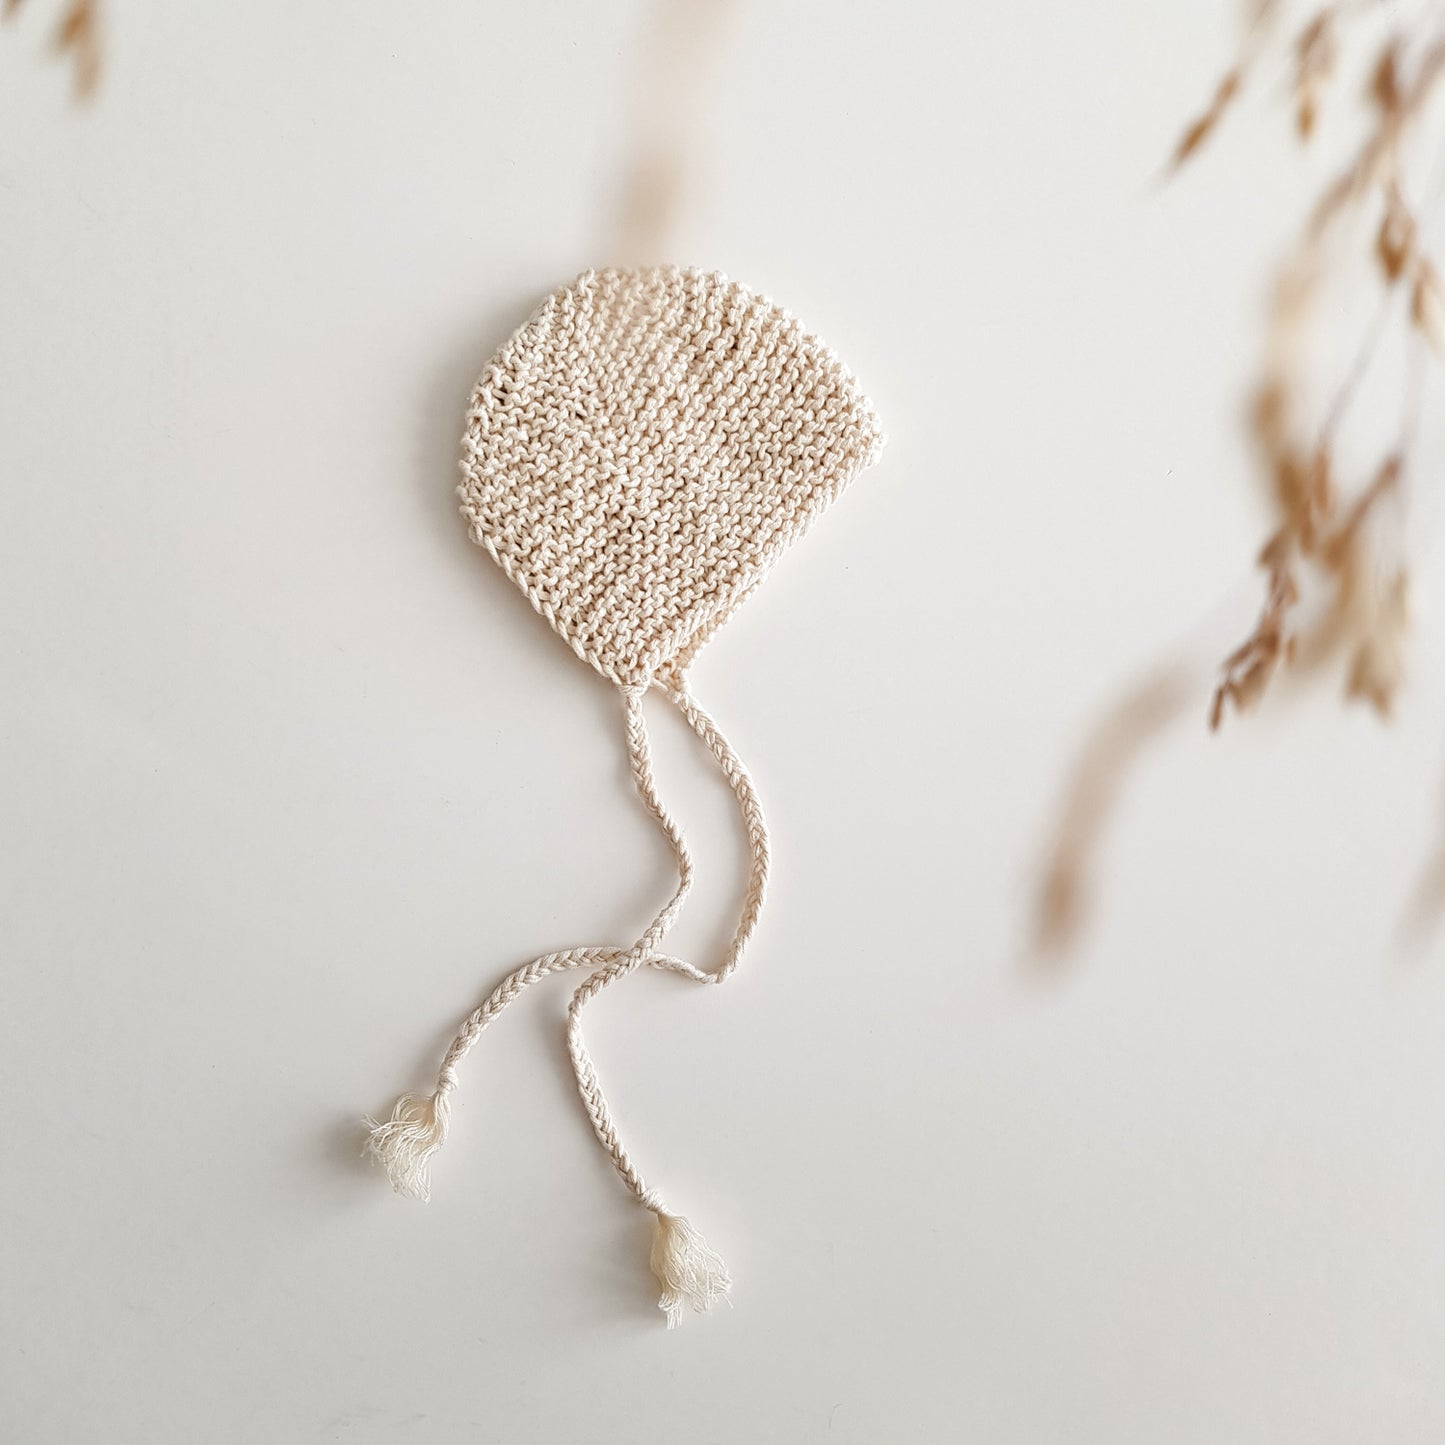 Knitted bonnet for baby doll, natural white